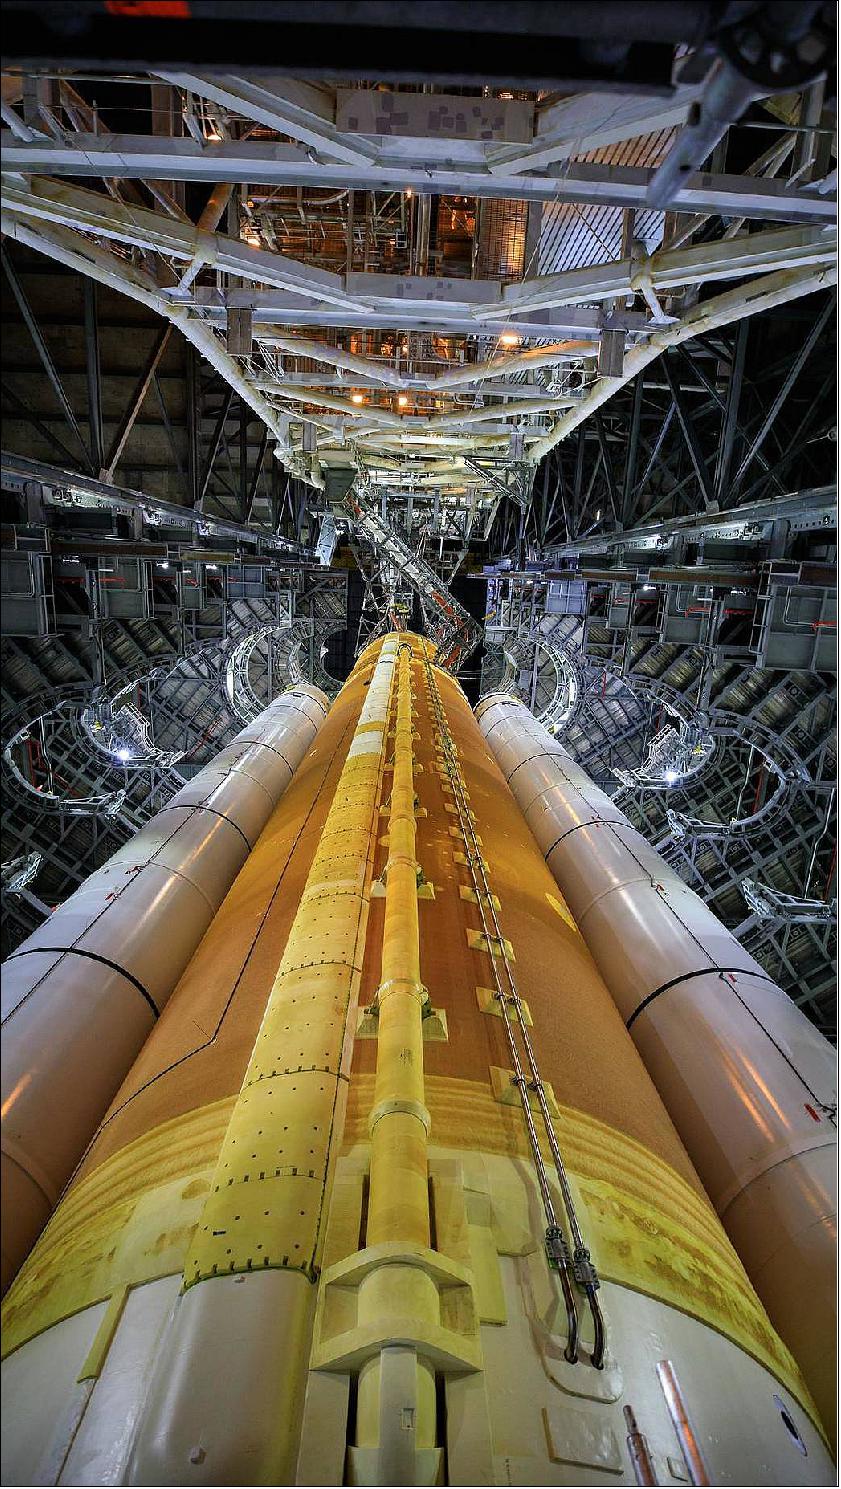 Figure 13: NASA has completed the design certification review (DCR) for the Space Launch System Program (SLS) rocket ahead of the Artemis I mission to send the Orion spacecraft to the Moon. This close-up view shows the SLS rocket for Artemis I inside High Bay 3 of the Vehicle Assembly Building (VAB) at NASA’s Kennedy Space Center in Florida on Sept. 20, 2021. Inside the VAB, the rocket recently completed the umbilical retract and release test and the integrated modal test. With the completion of the SLS design, NASA has now certified the SLS and Orion spacecraft designs, as well as the new Launch Control Center at Kennedy for the Artemis I mission (image credit: NASA/Frank Michaux)